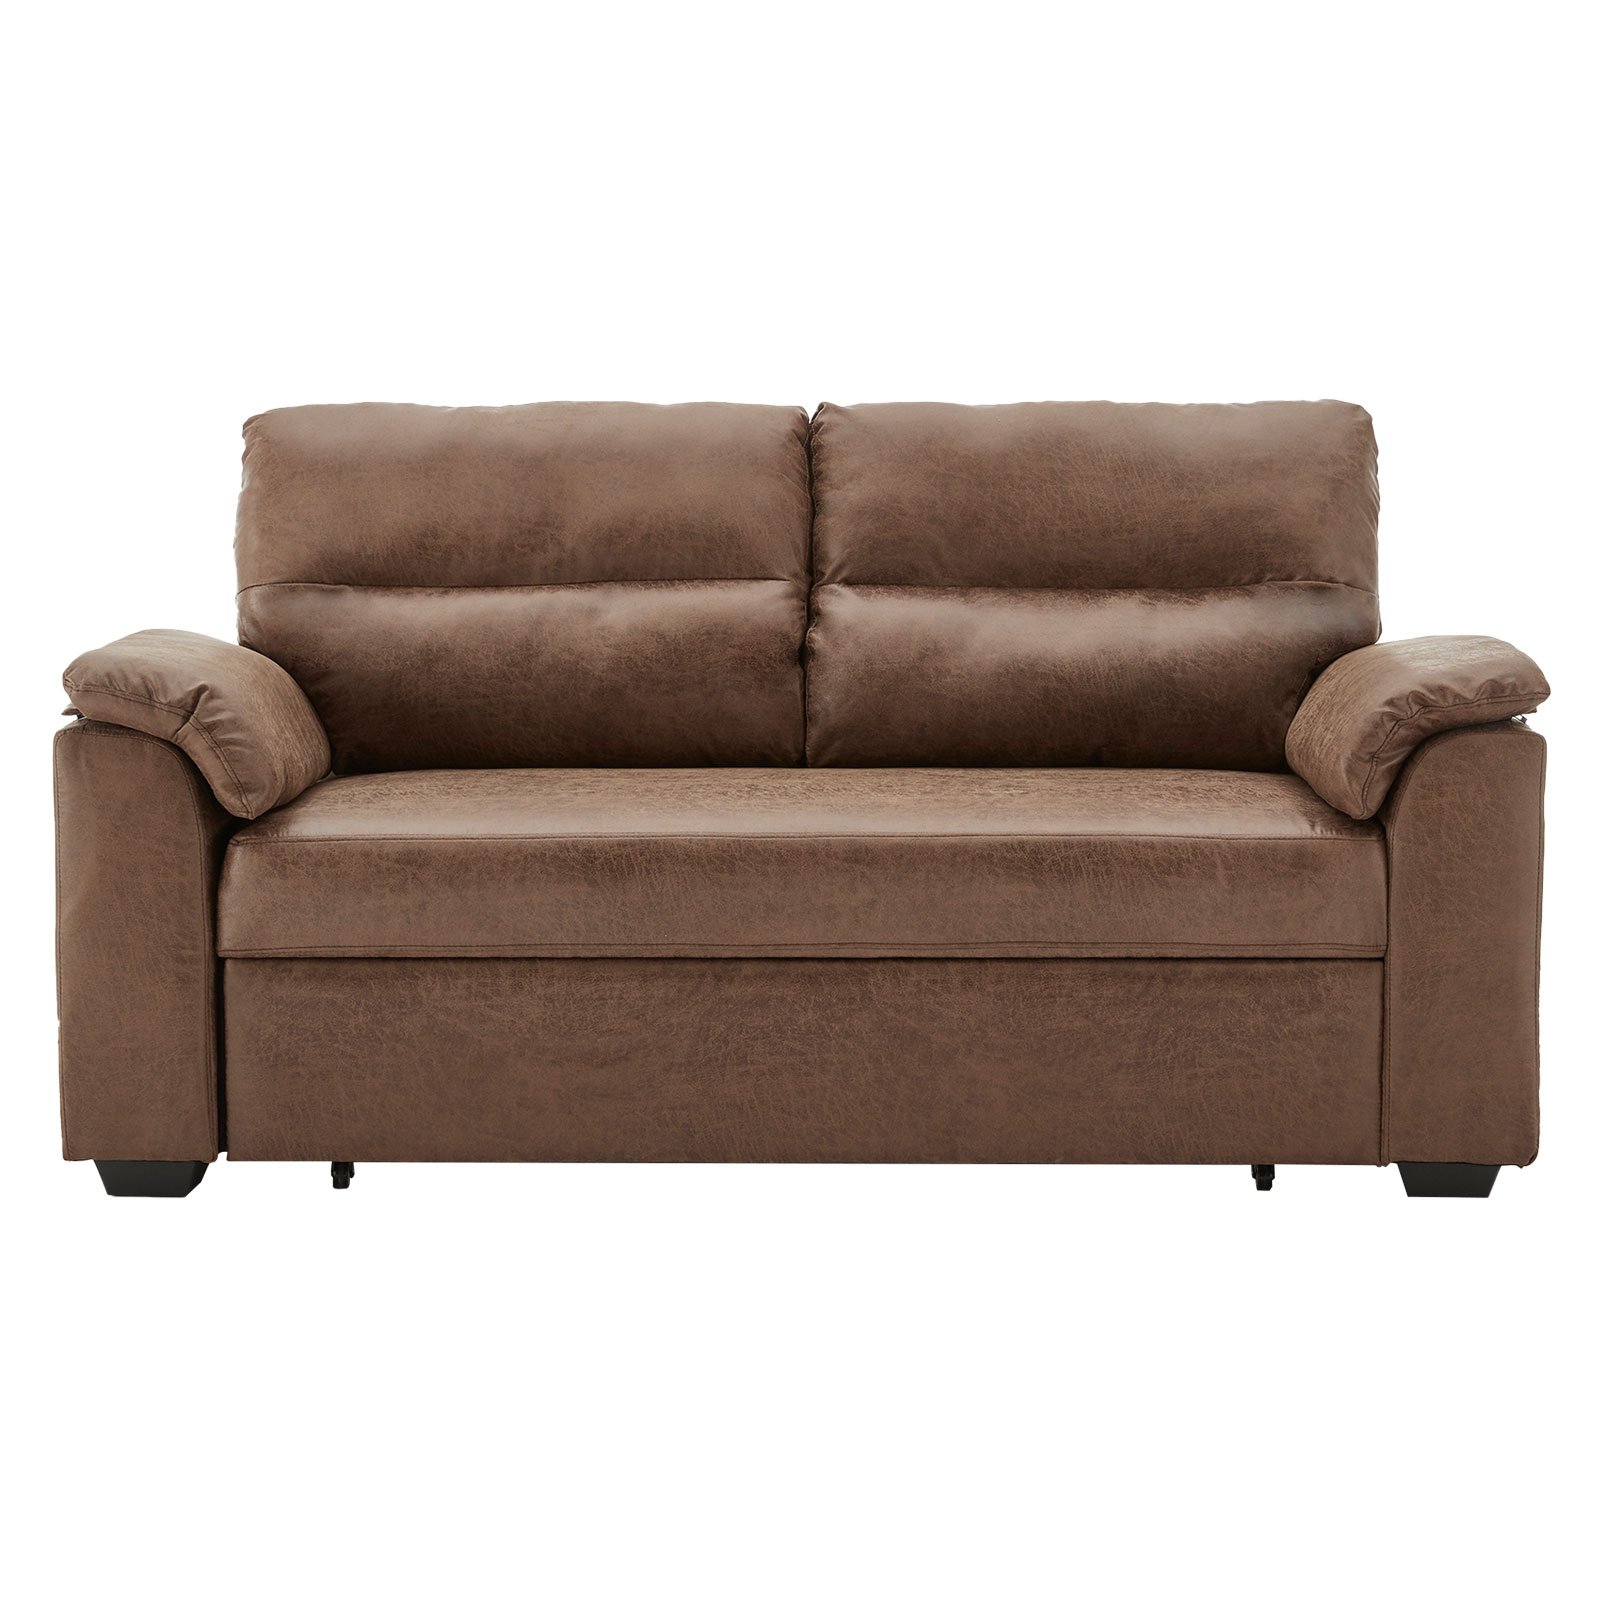 Sarantino Distressed Fabric Sofa Bed Couch Lounge - Brown 2